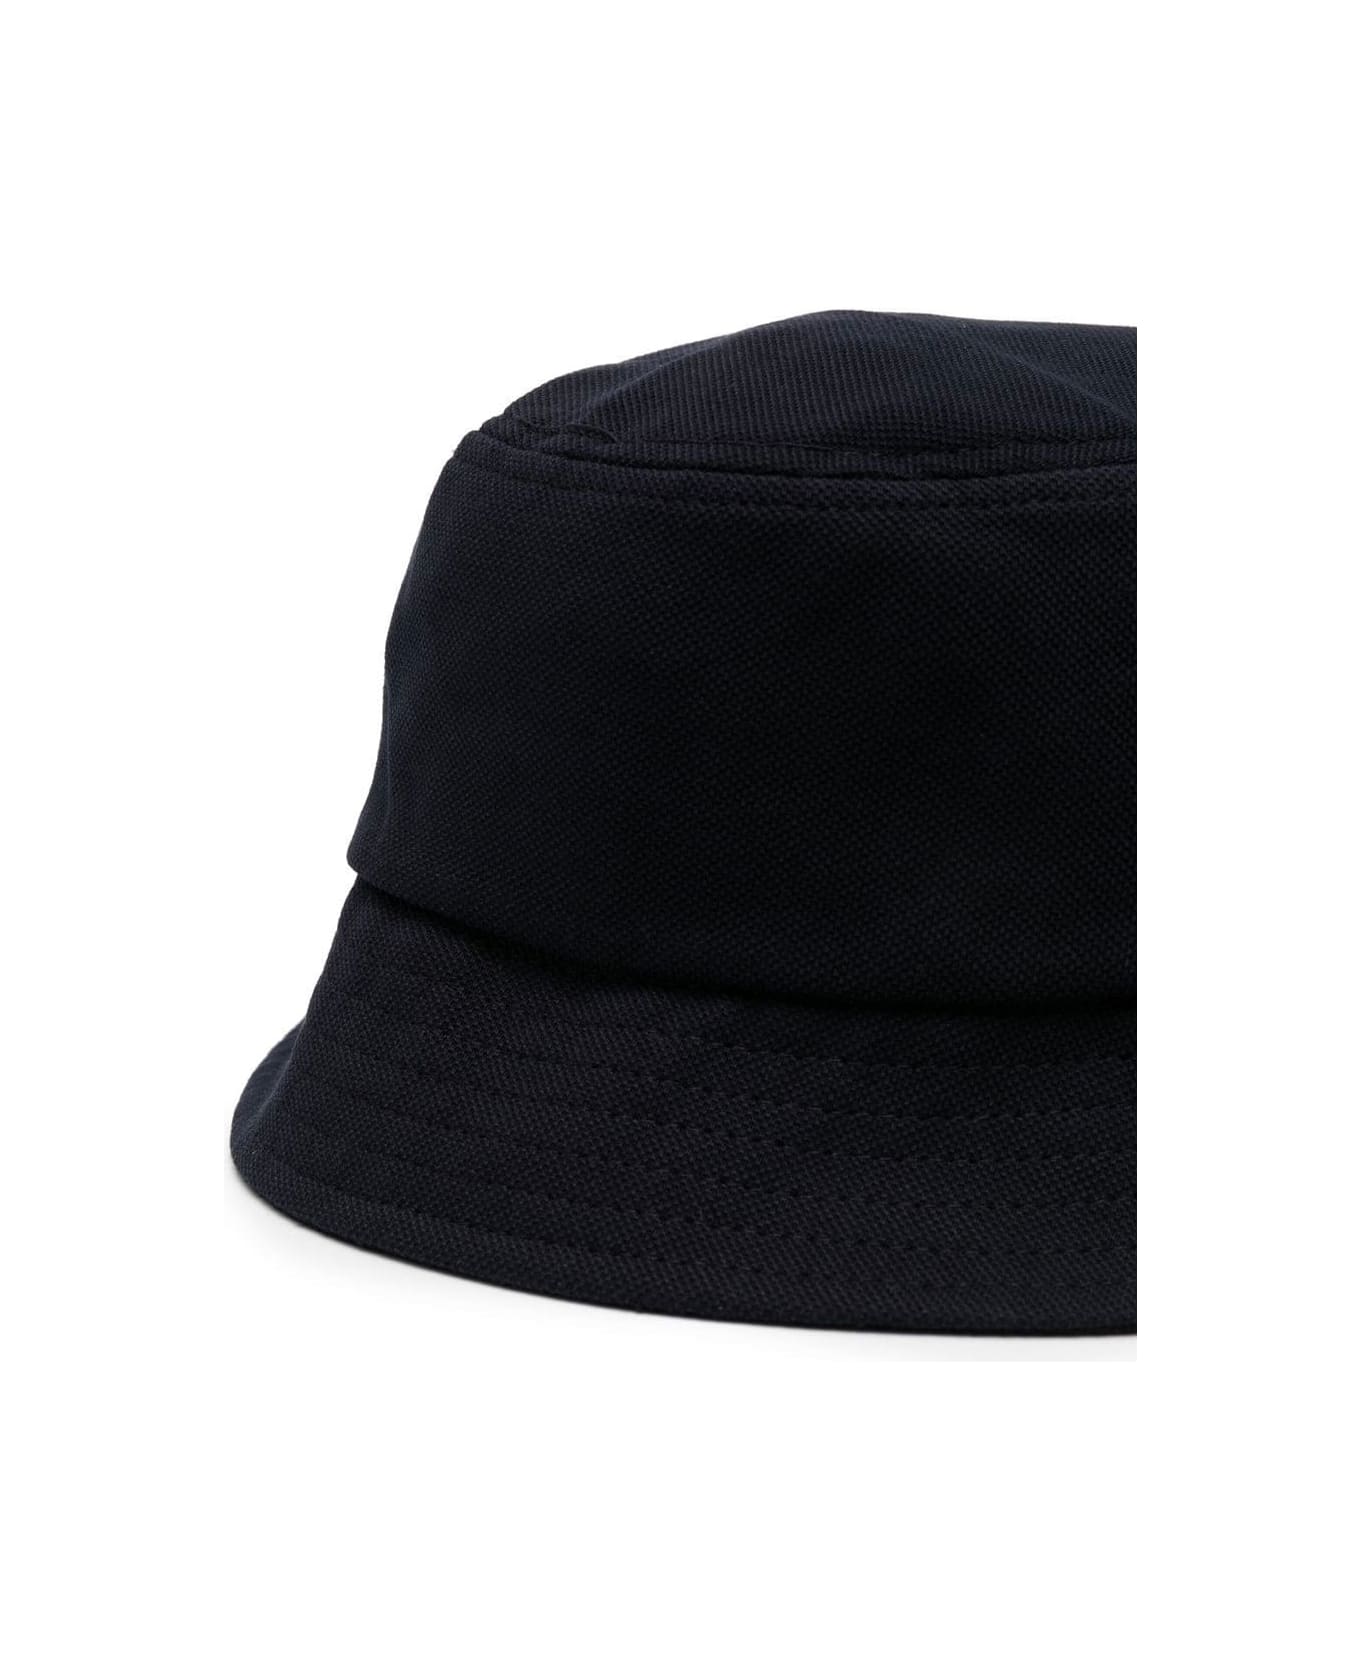 Fred Perry Fp Pique Bucket Hat - Navy